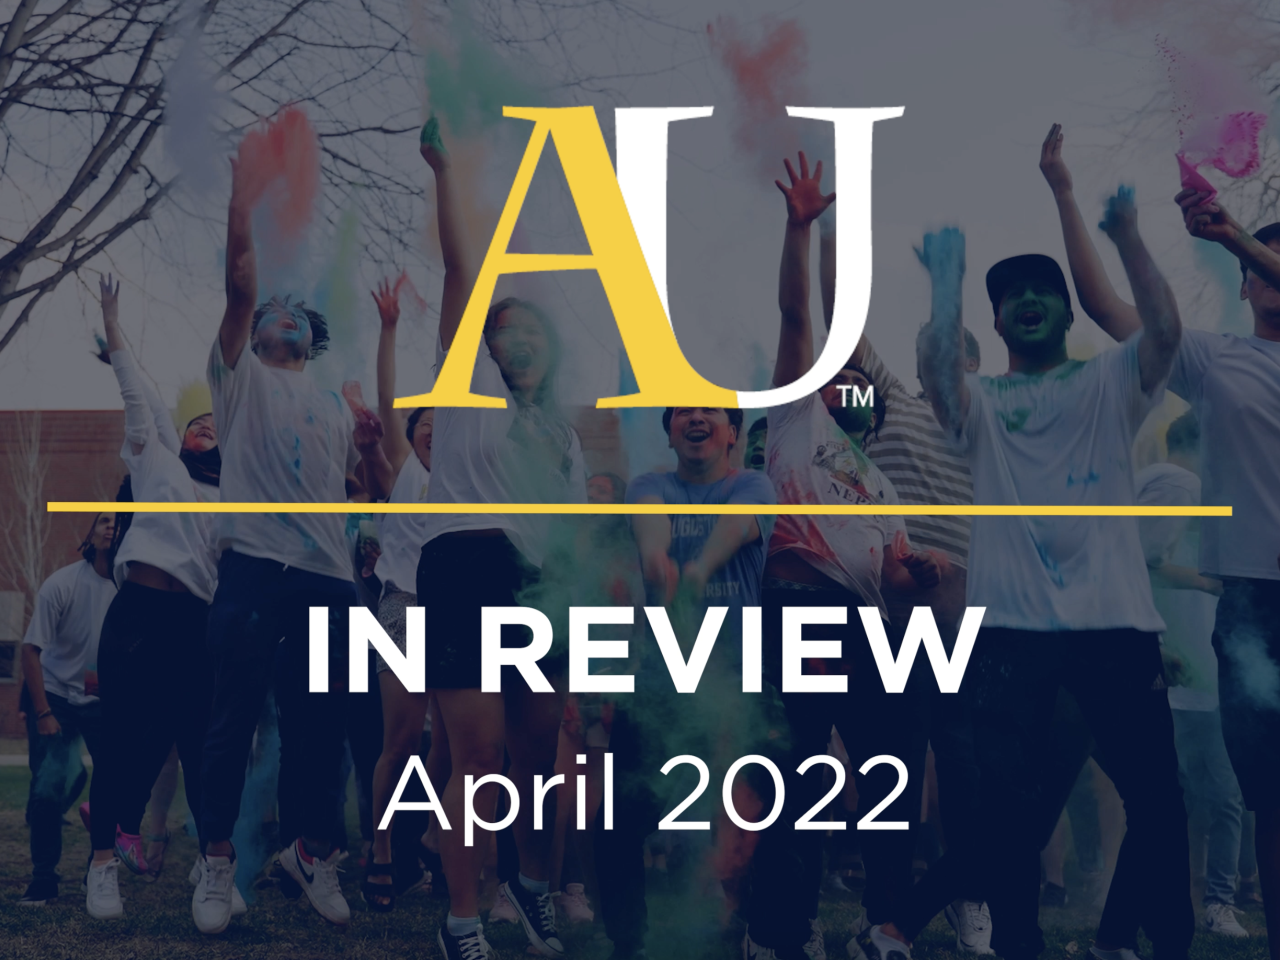 AU in review 2022 